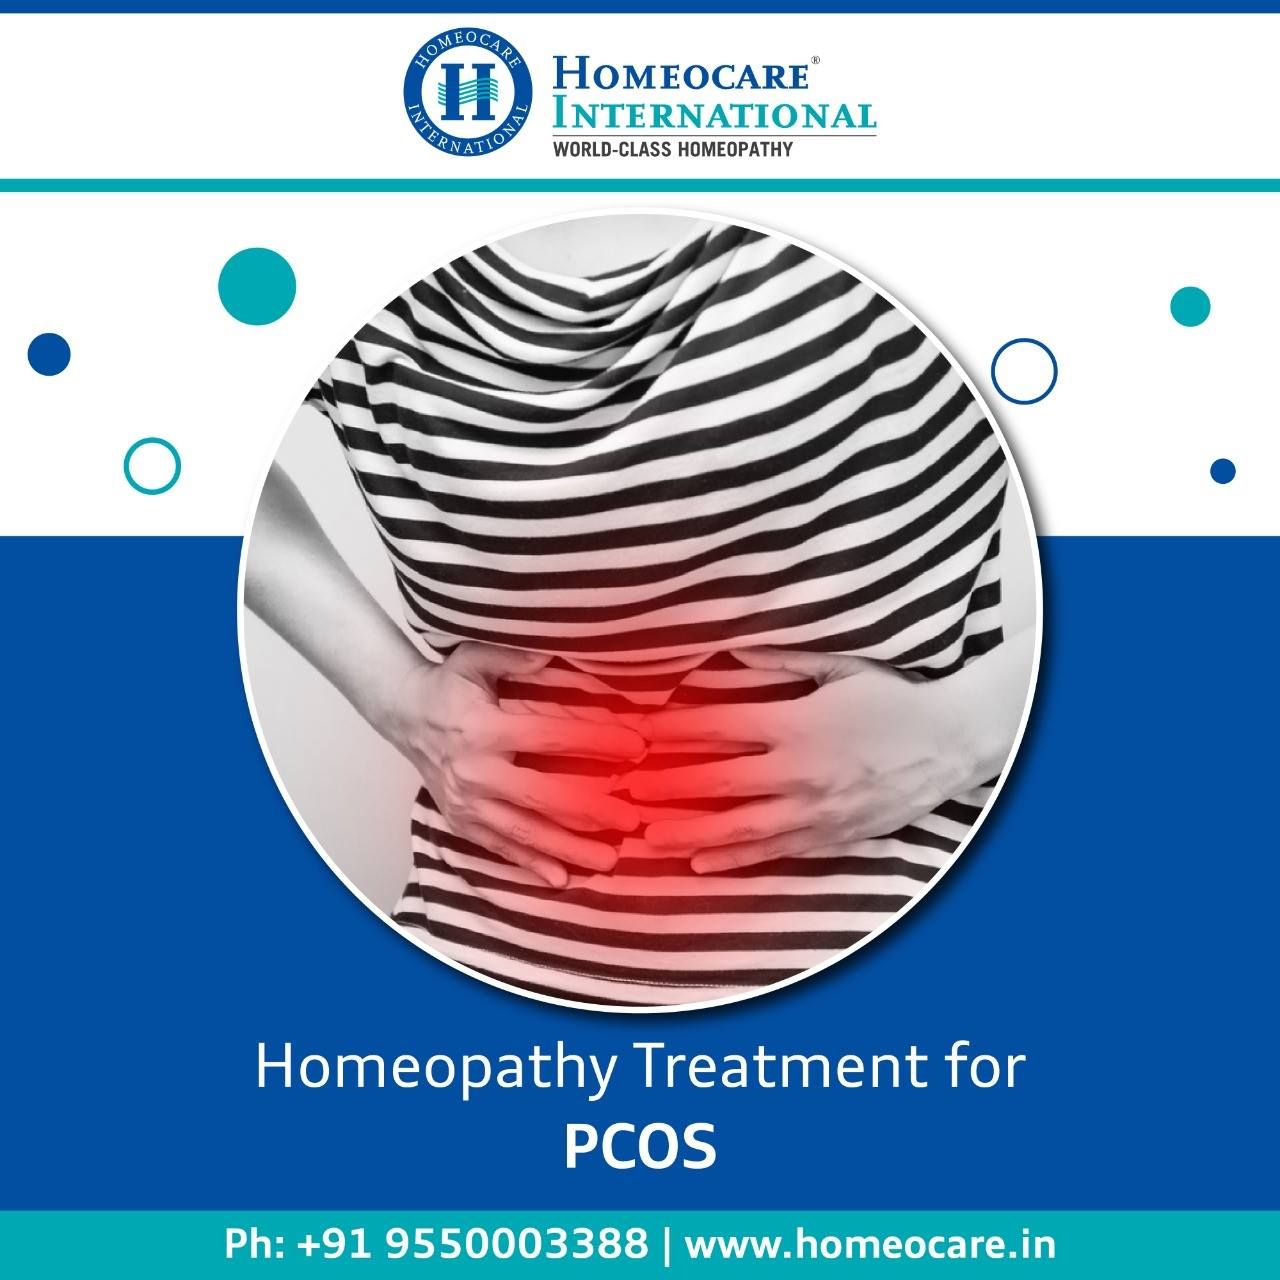 PCOS Treatment In Homeopathy